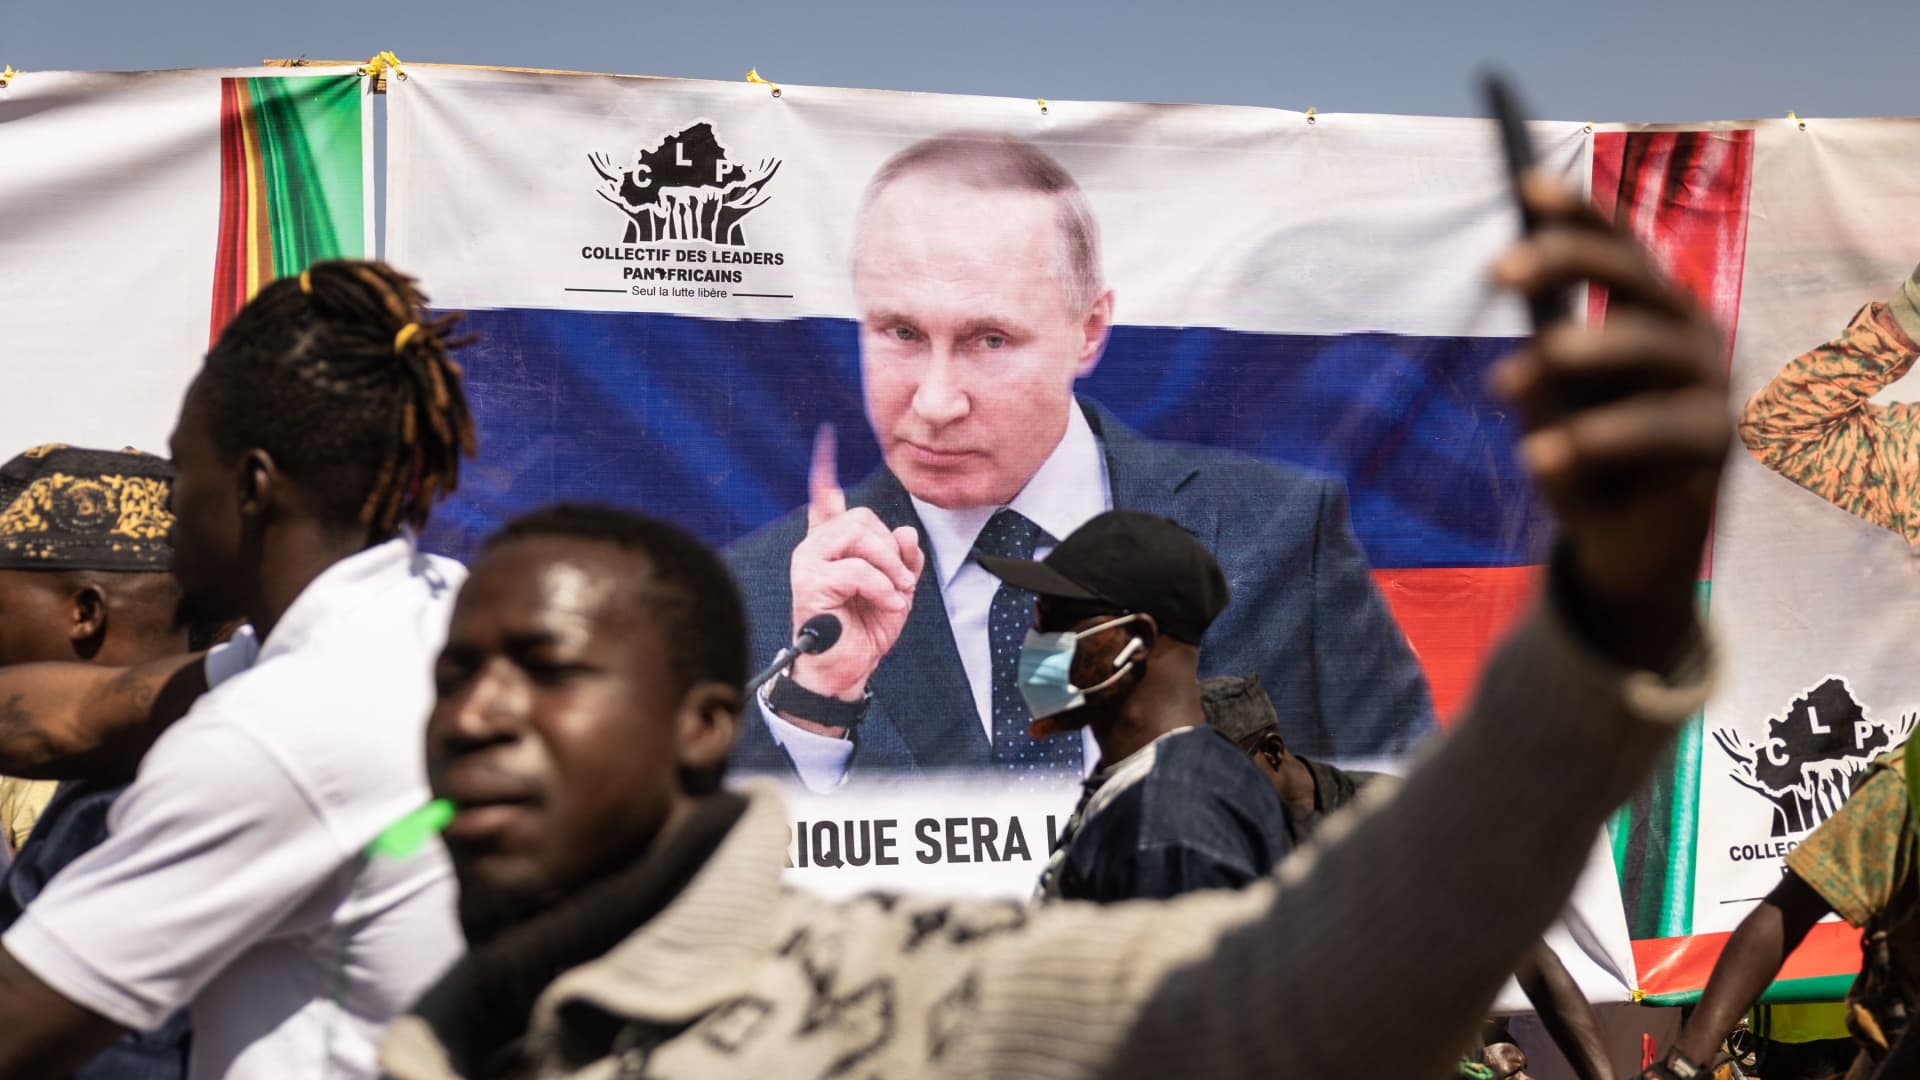 OUAGADOUGOU, Burkina Faso - Jan. 20, 2023: A banner of Russian President Vladimir Putin is seen during a protest to support the Burkina Faso President Captain Ibrahim Traore and to demand the departure of France's ambassador and military forces.